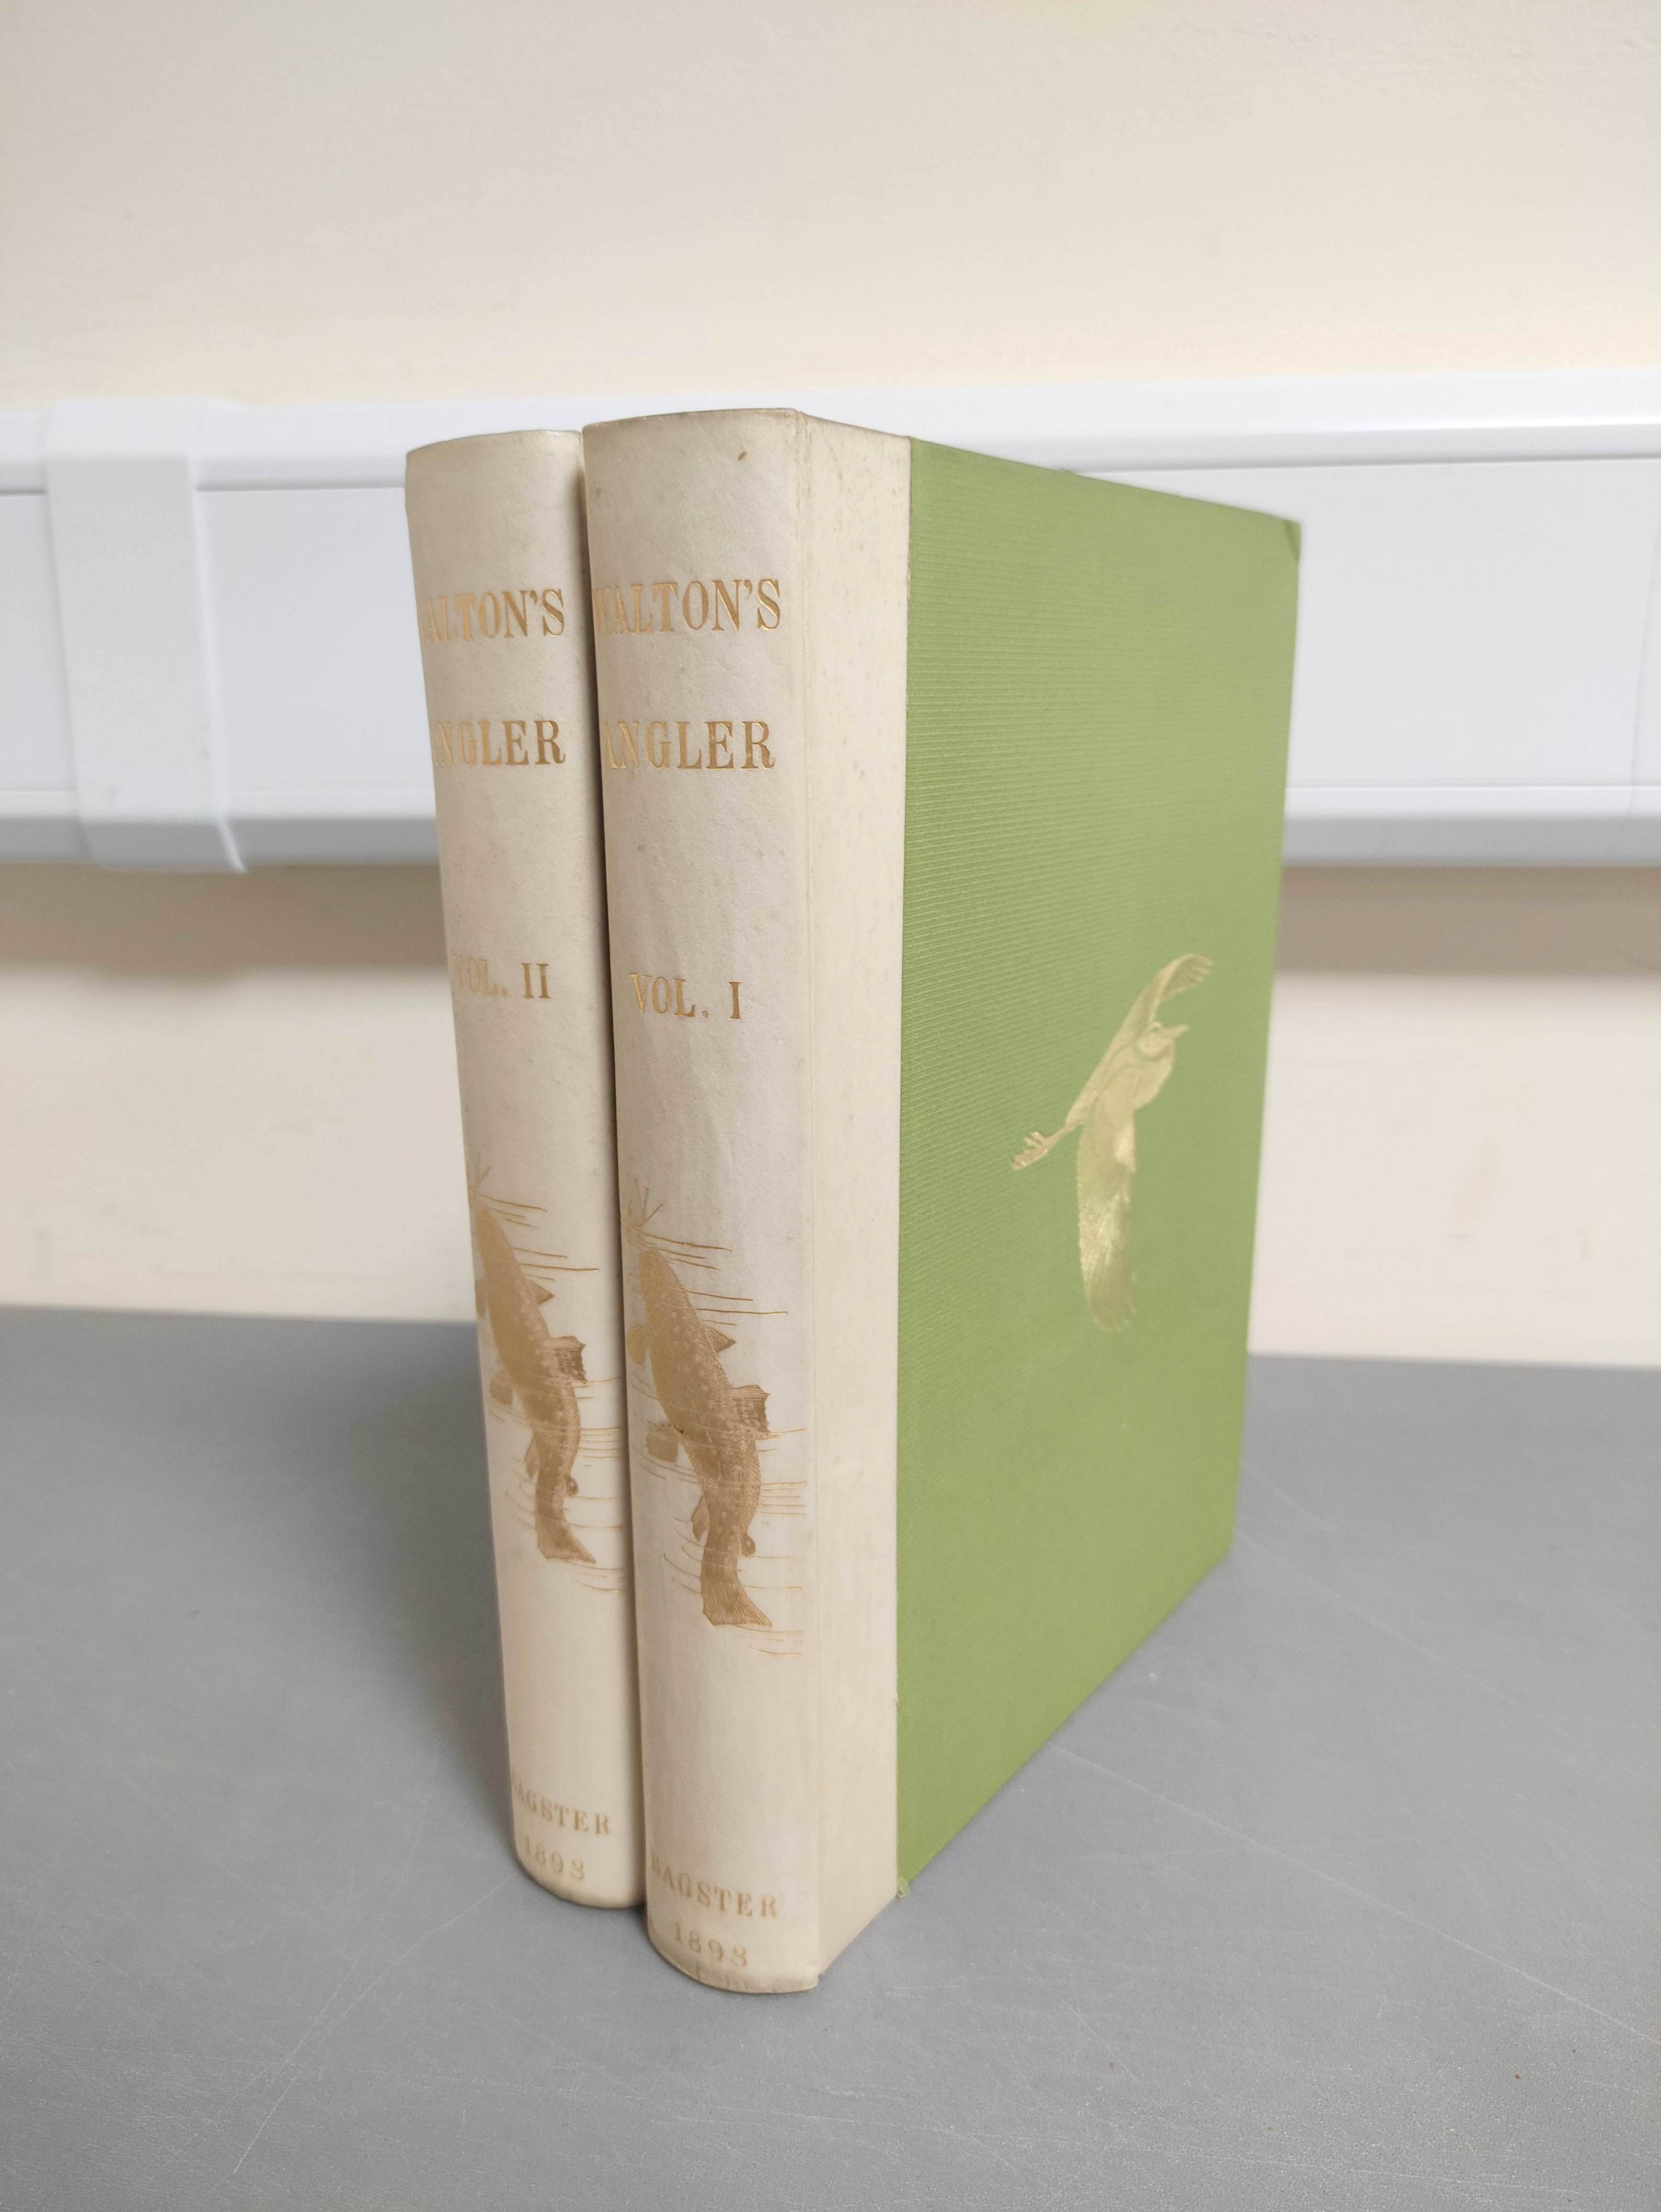 WALTON I. & COTTON C.  The Complete Angler, ed. by J. E. Harting. 2 vols. Ltd. ed. 282/350. Etched